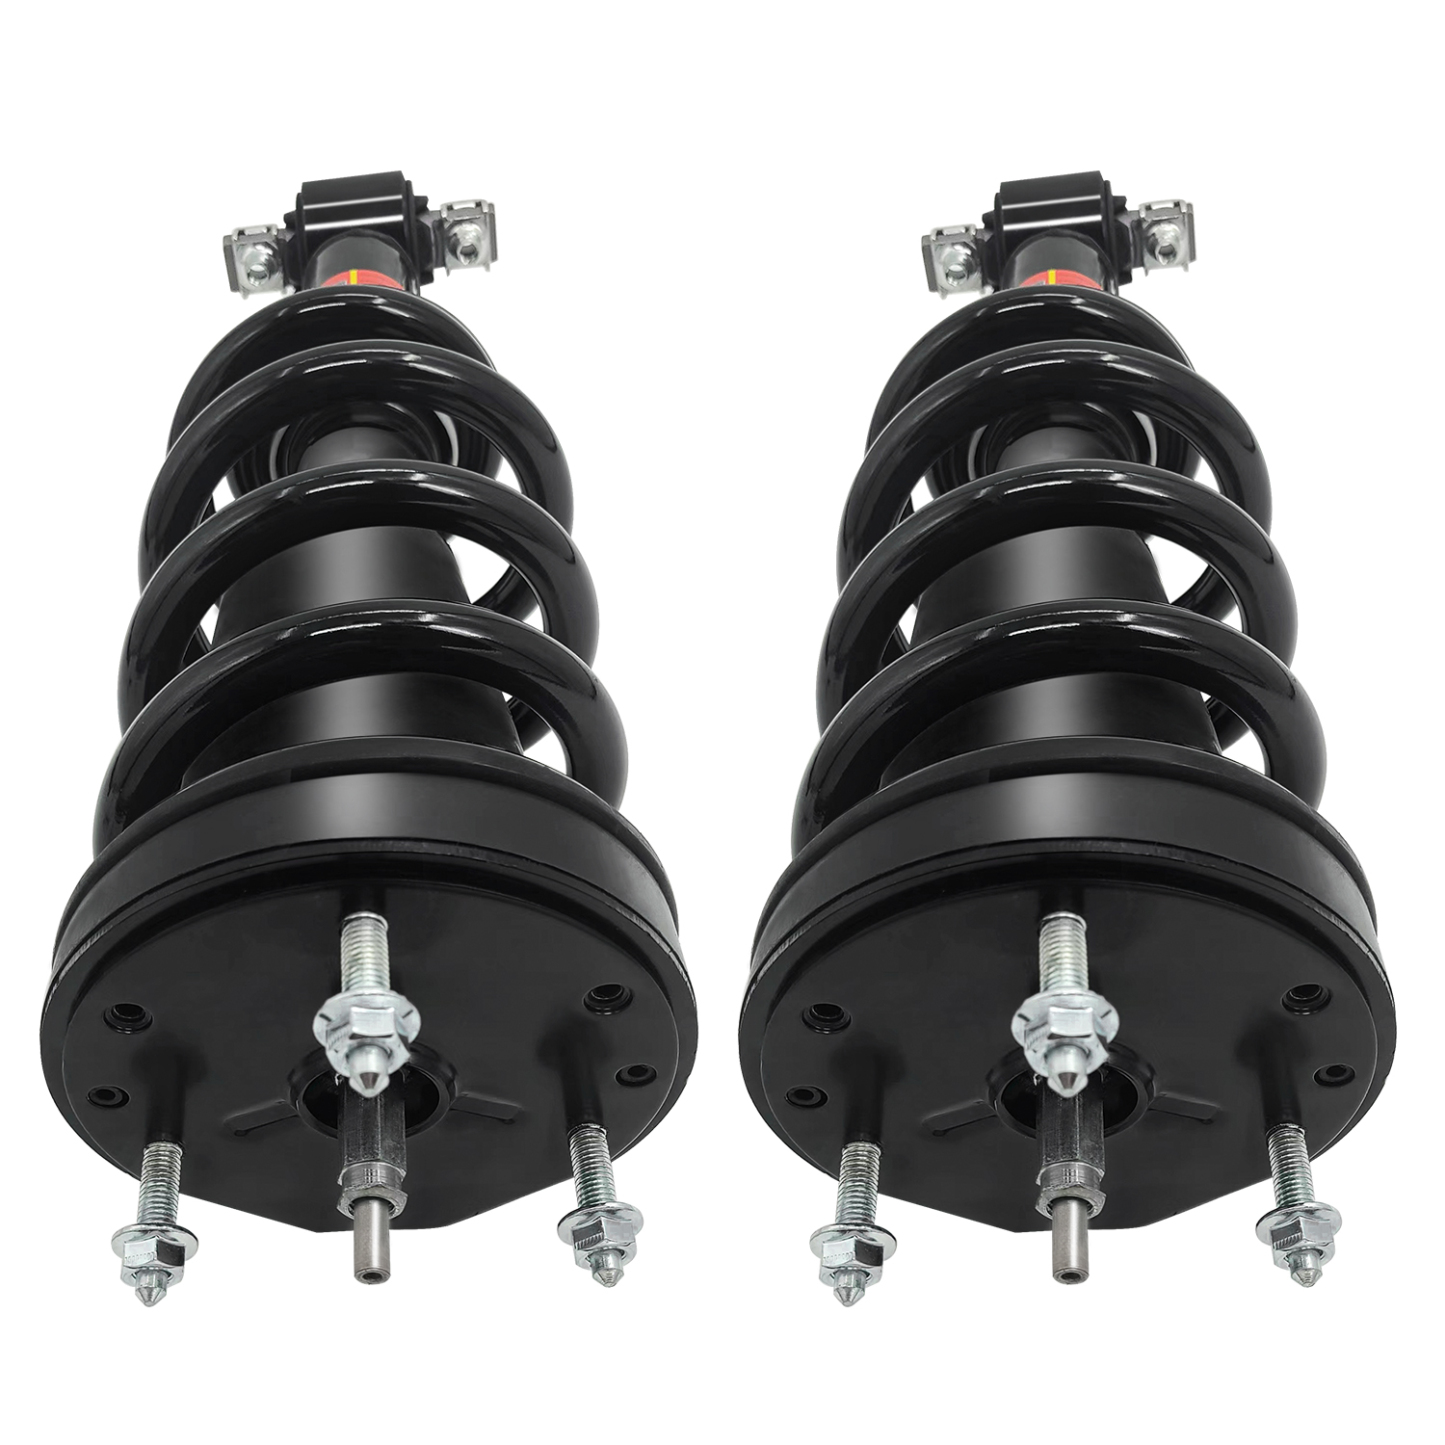 2007-2014 Cadillac Escalade Front Magnetic Shock Absorber Assembly 580-431 Fit for Chevrolet Silverado 1500, Tahoe, Suburban, Avalanche, GMC Sierra 1500, Yukon, Yukon XL LUFT MEISTER